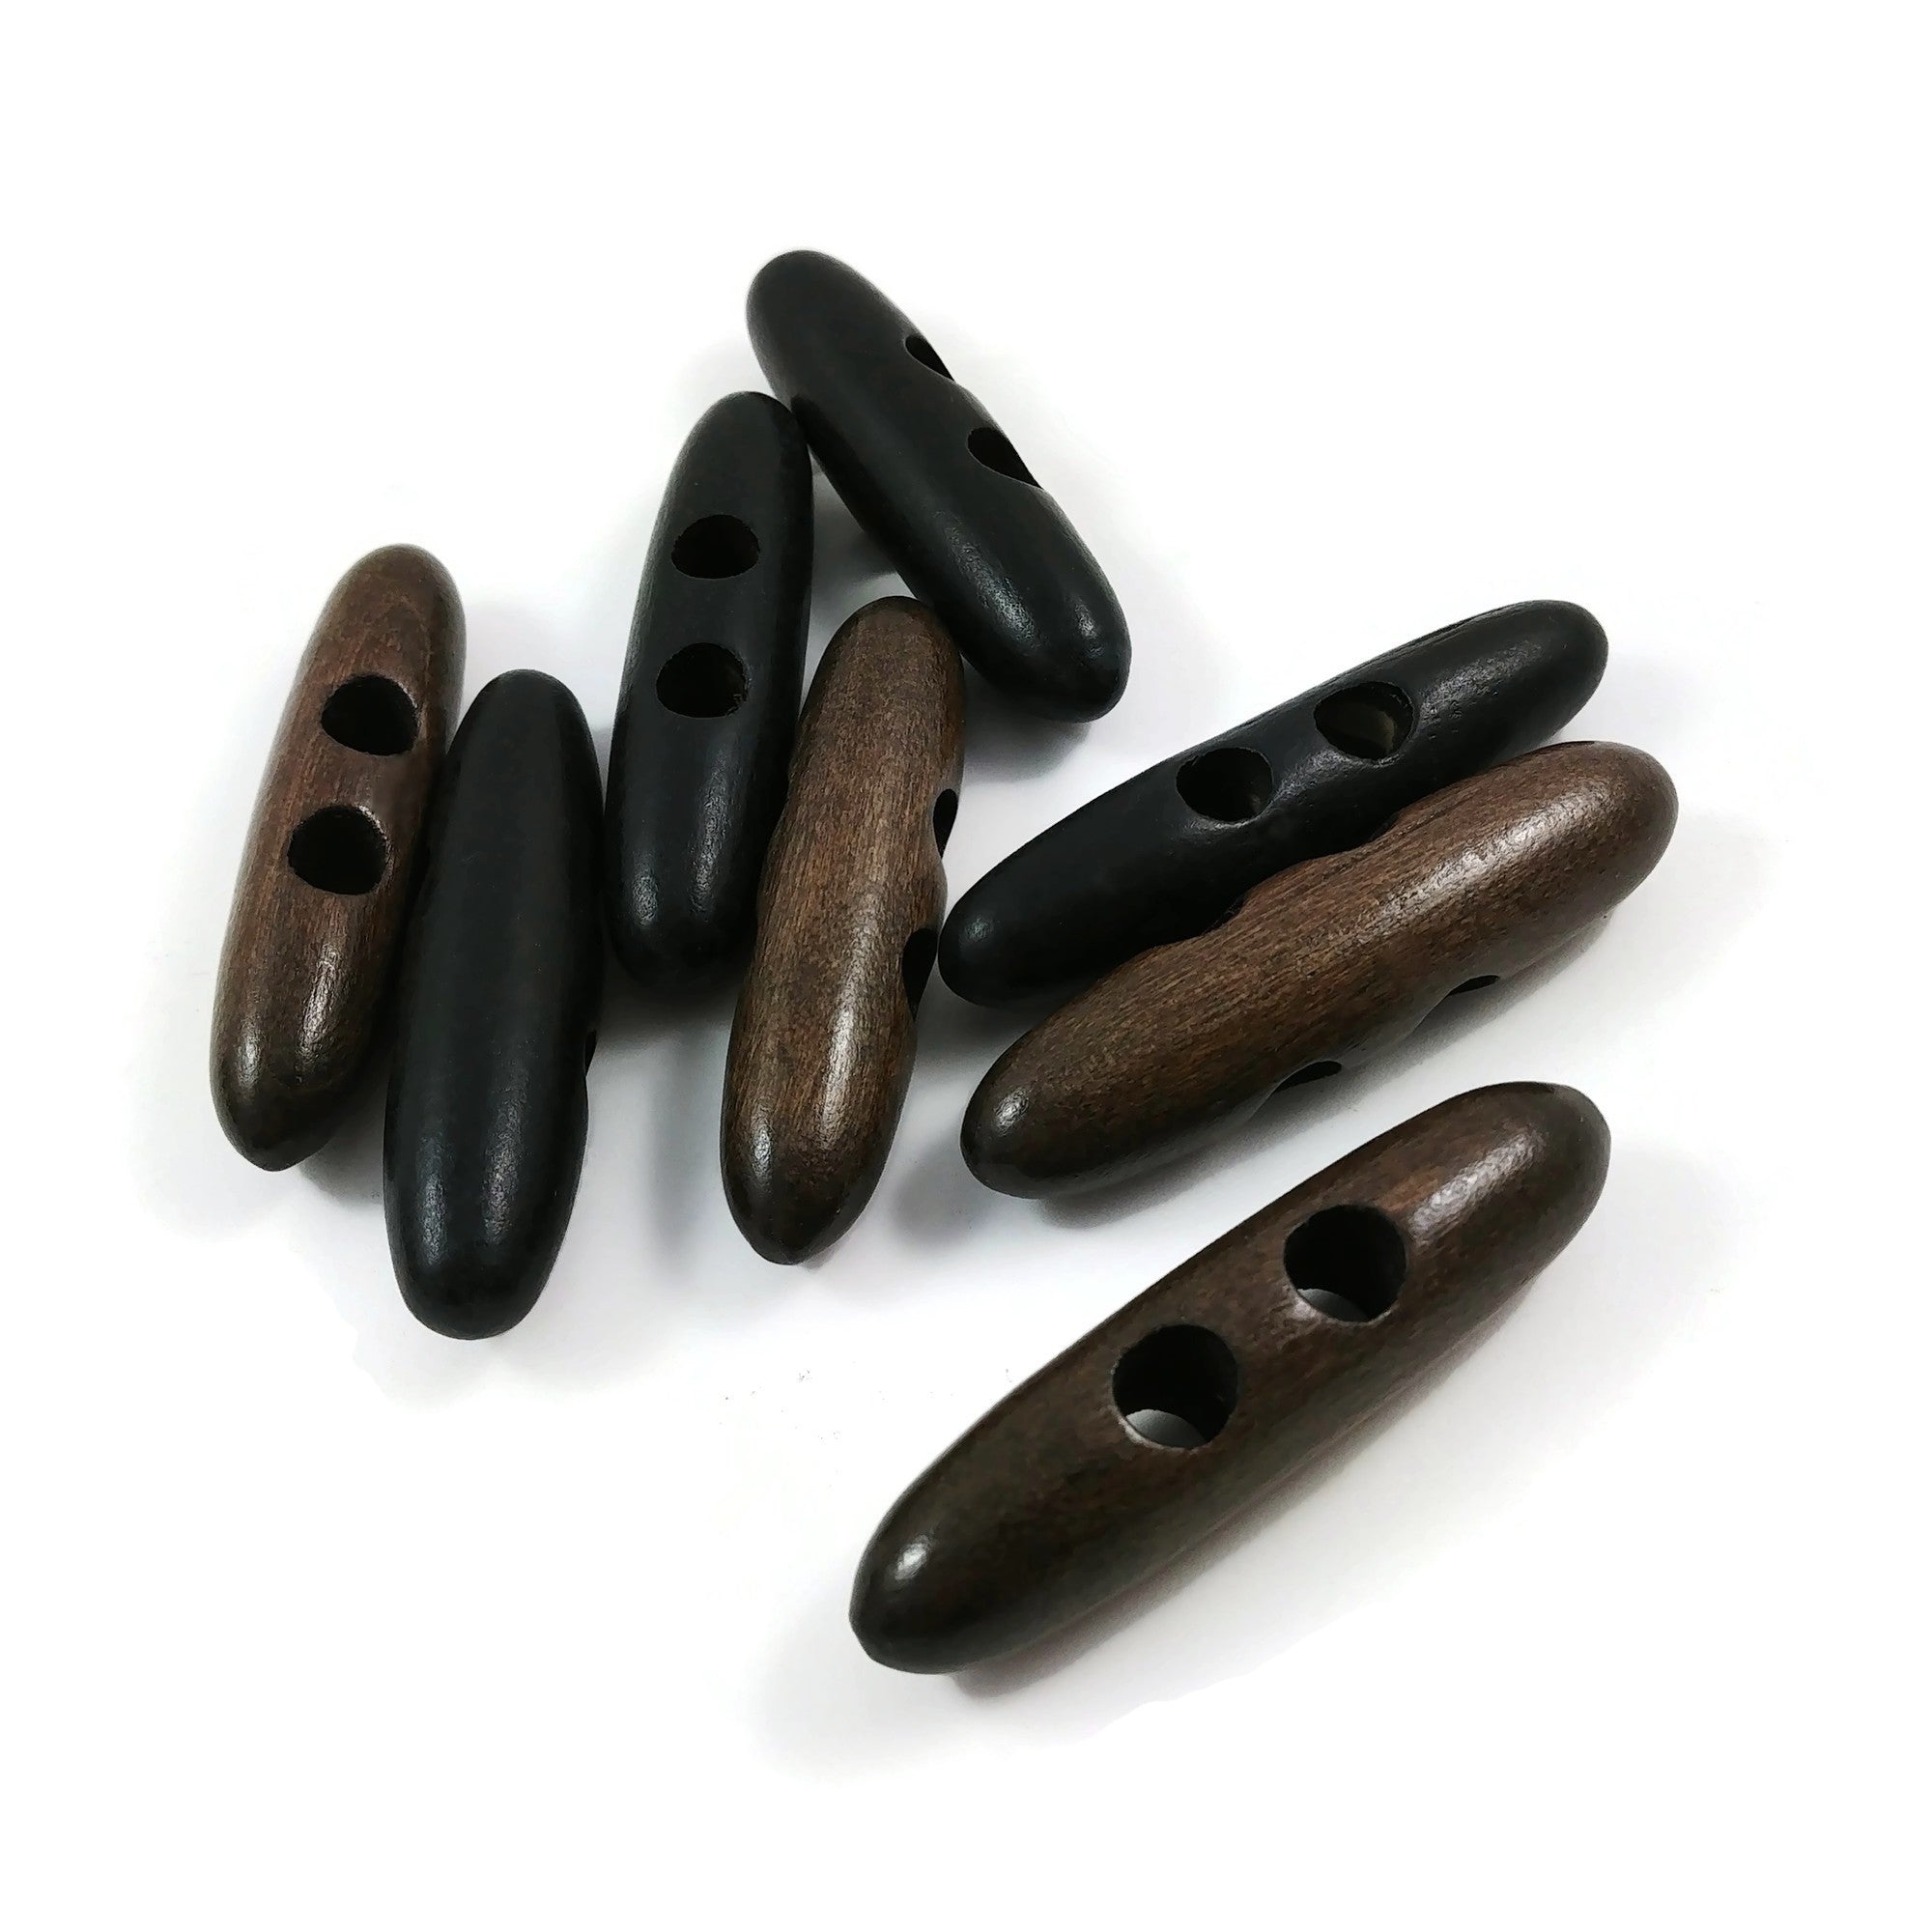 Extra large big button - 2 dark brown giant wooden buttons 60mm (2 3/8